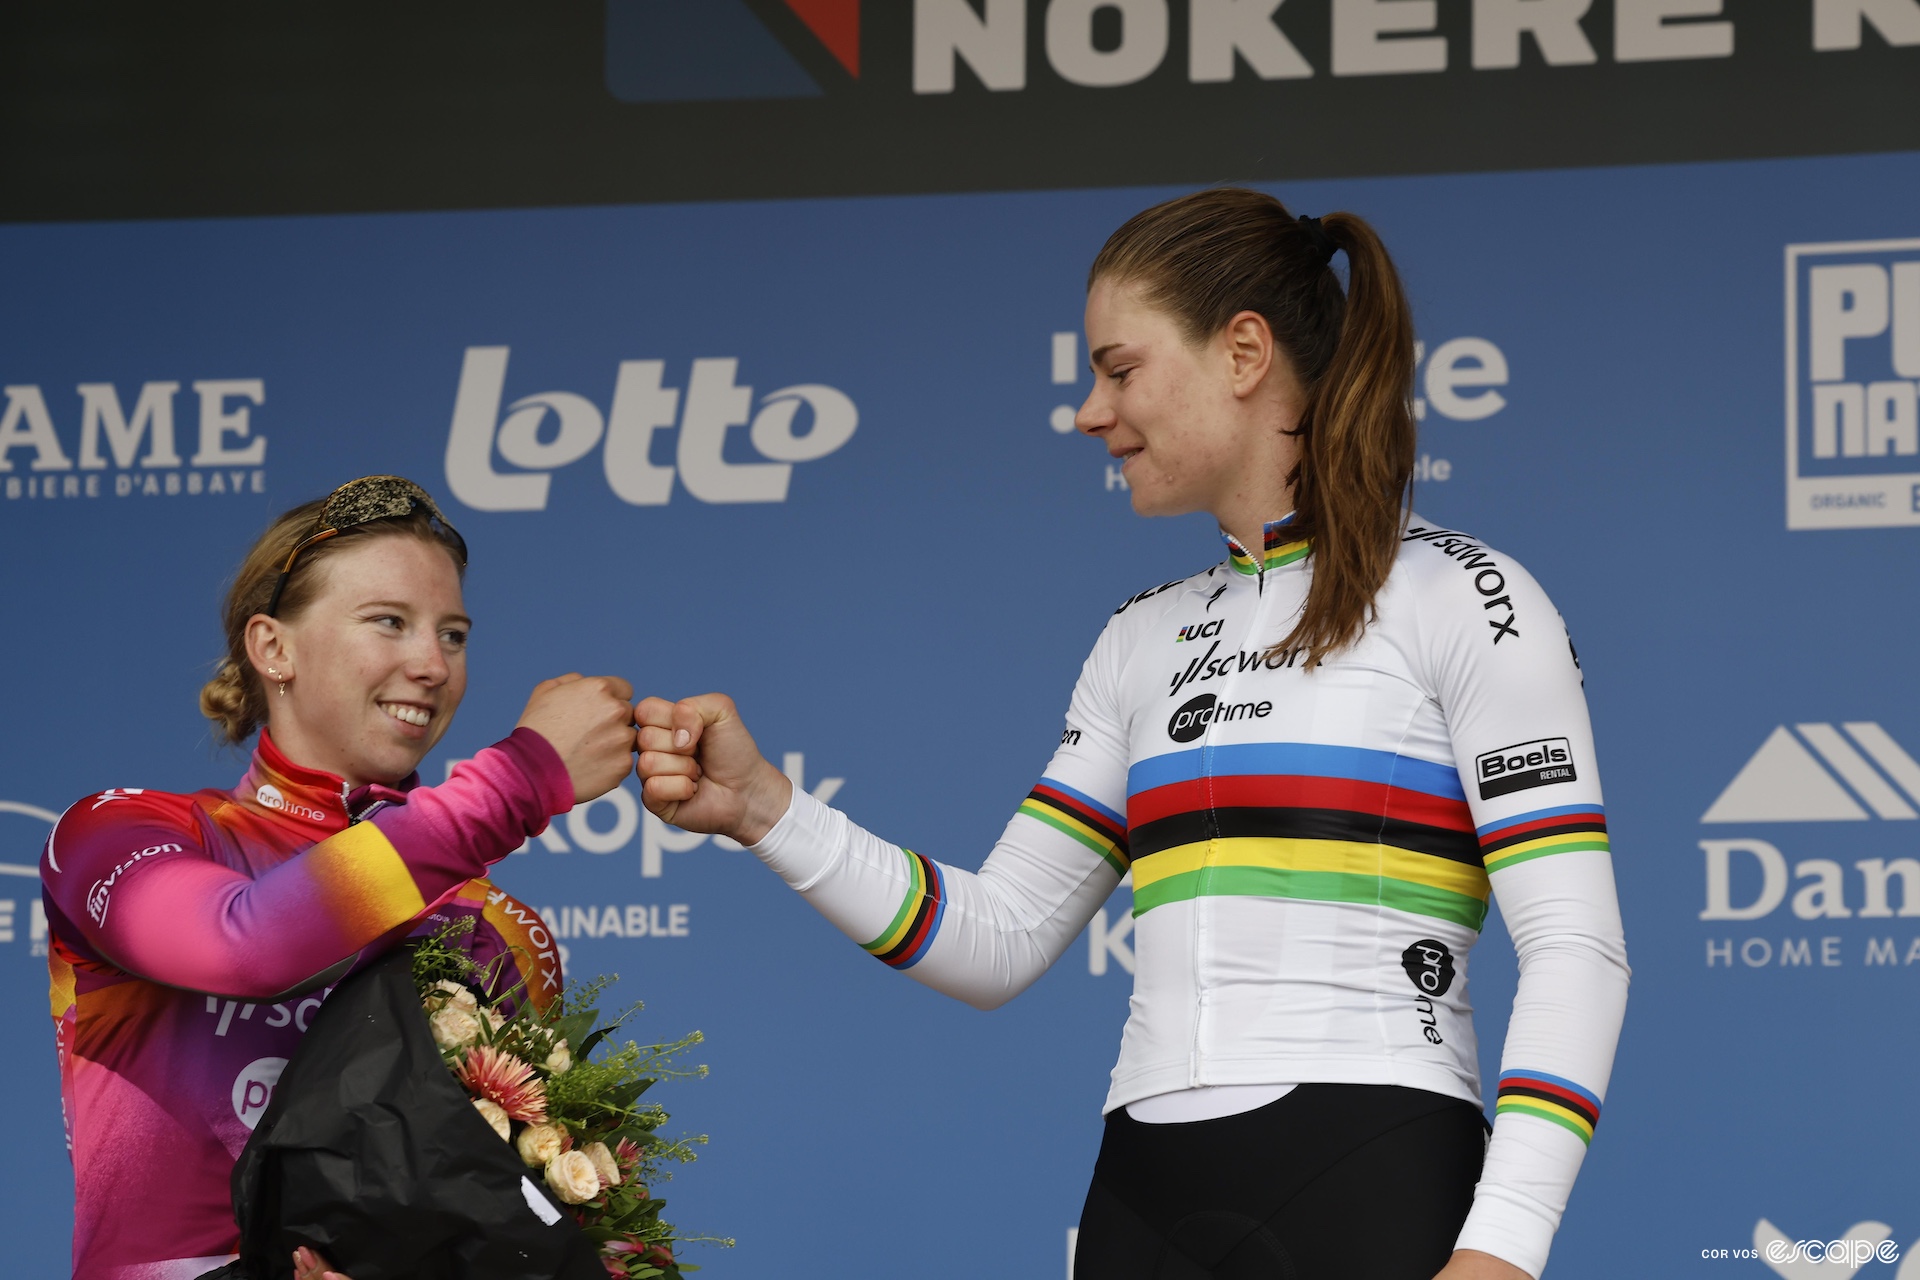 Two women fist bump on the podium of a cycling race